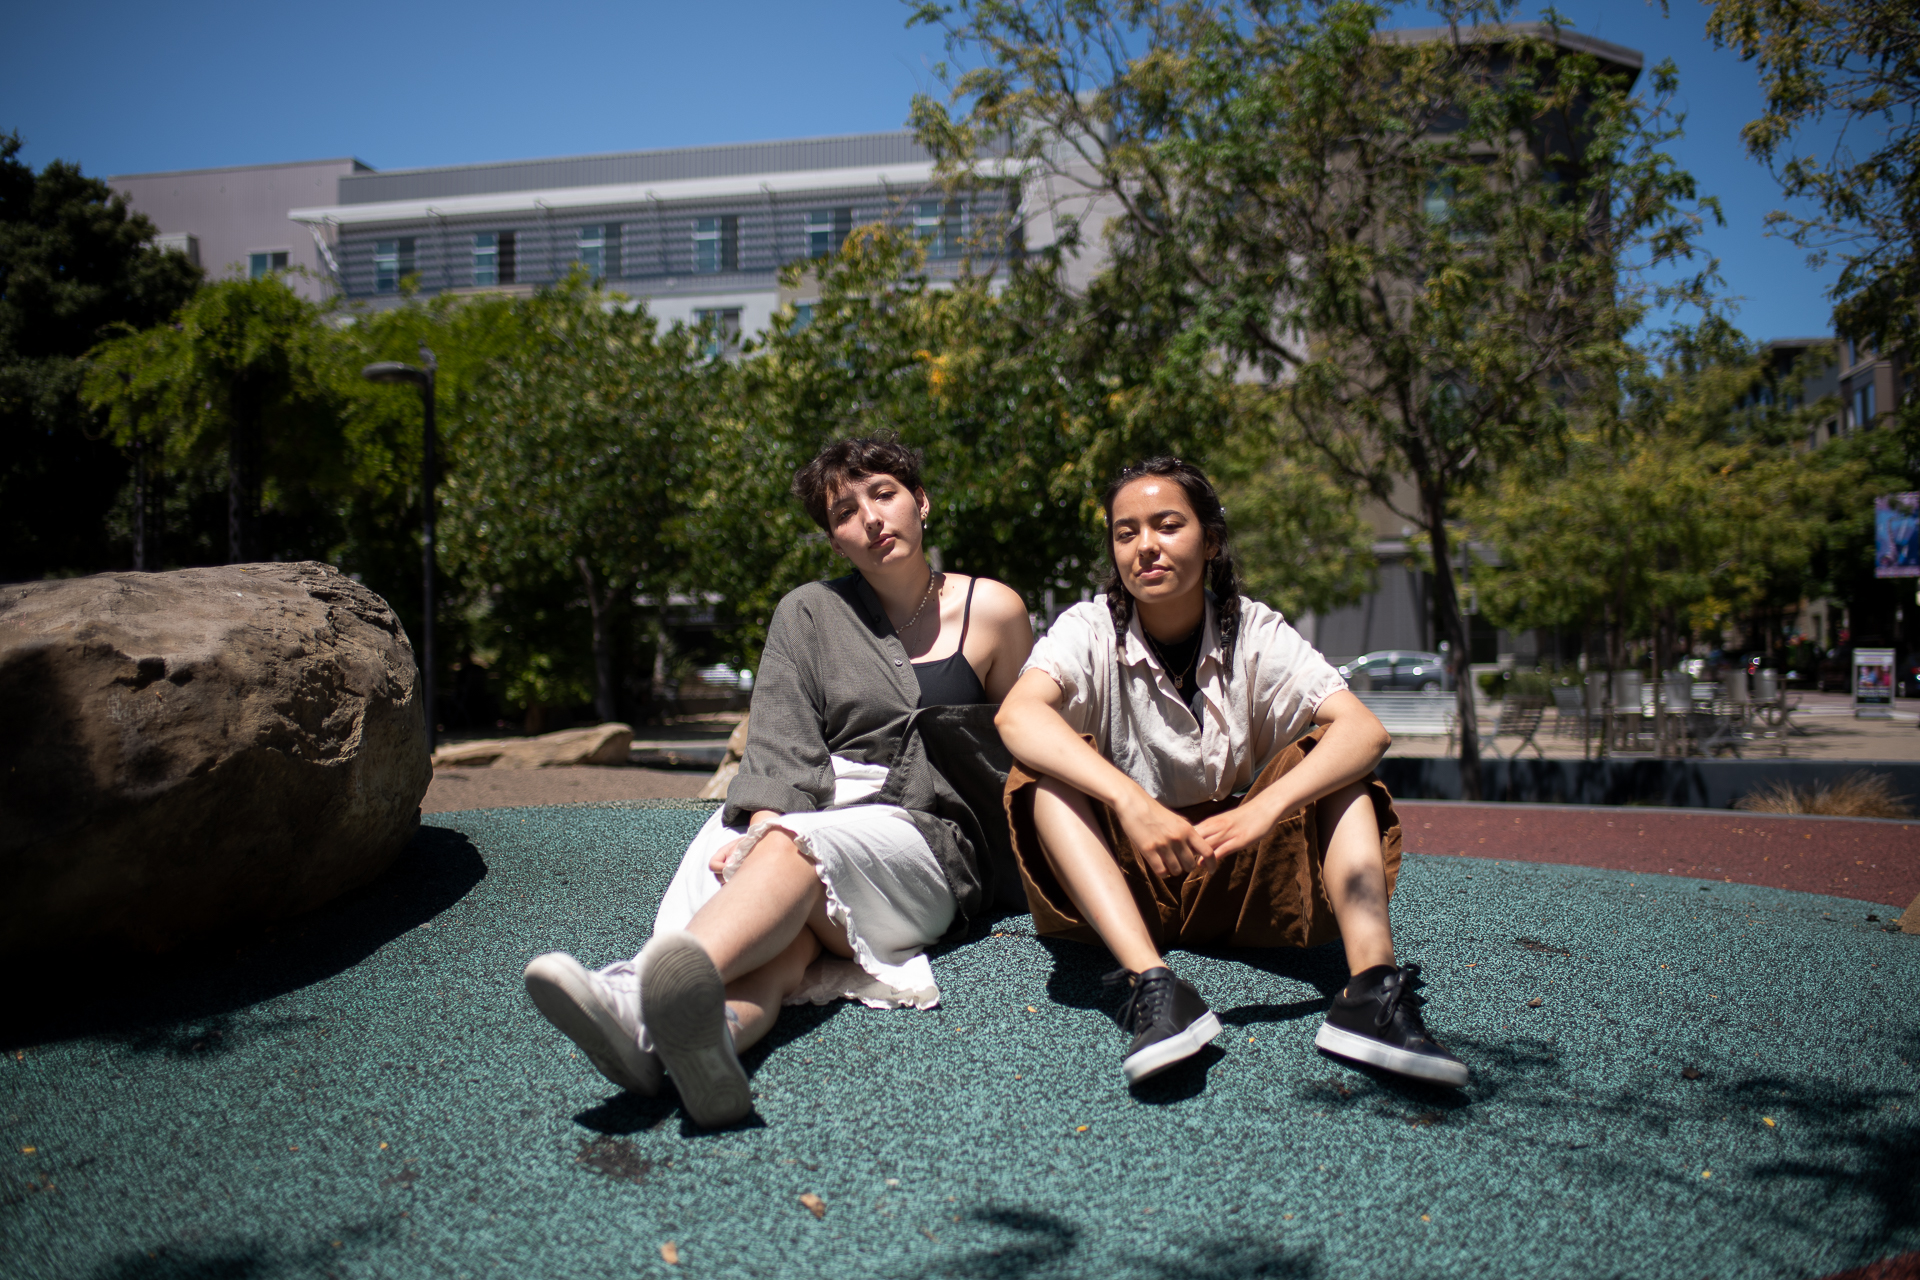 Two girls sit on the ground in front of a large building.